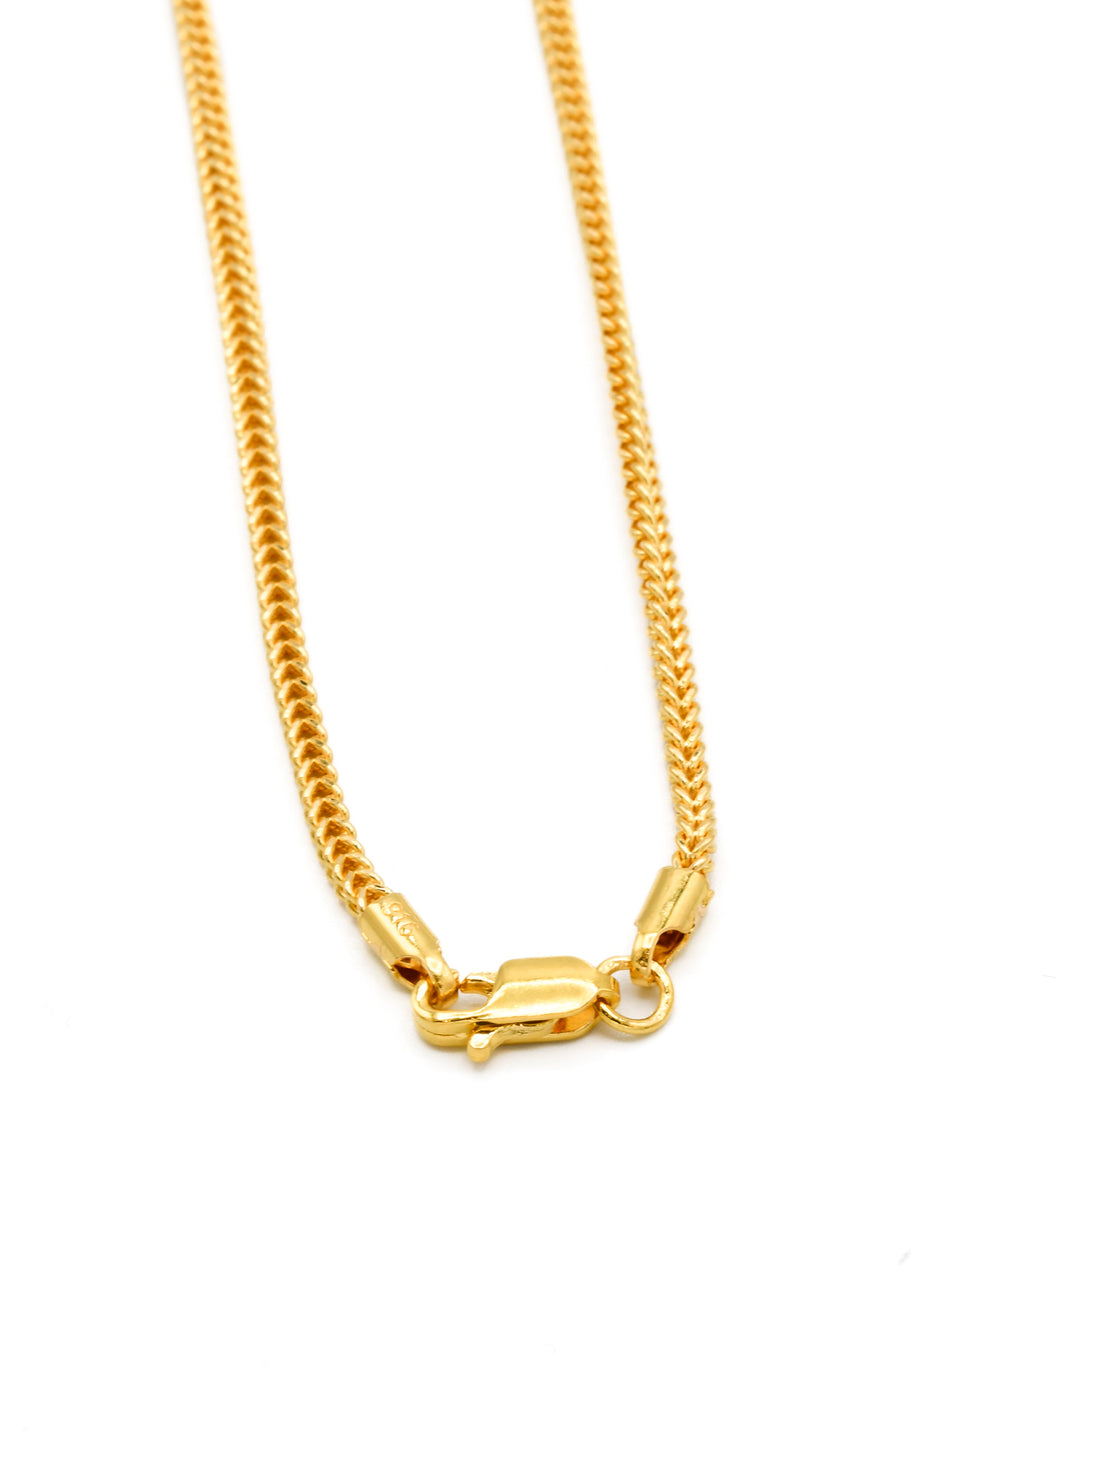 22ct Gold Hollow Fox Tail Chain